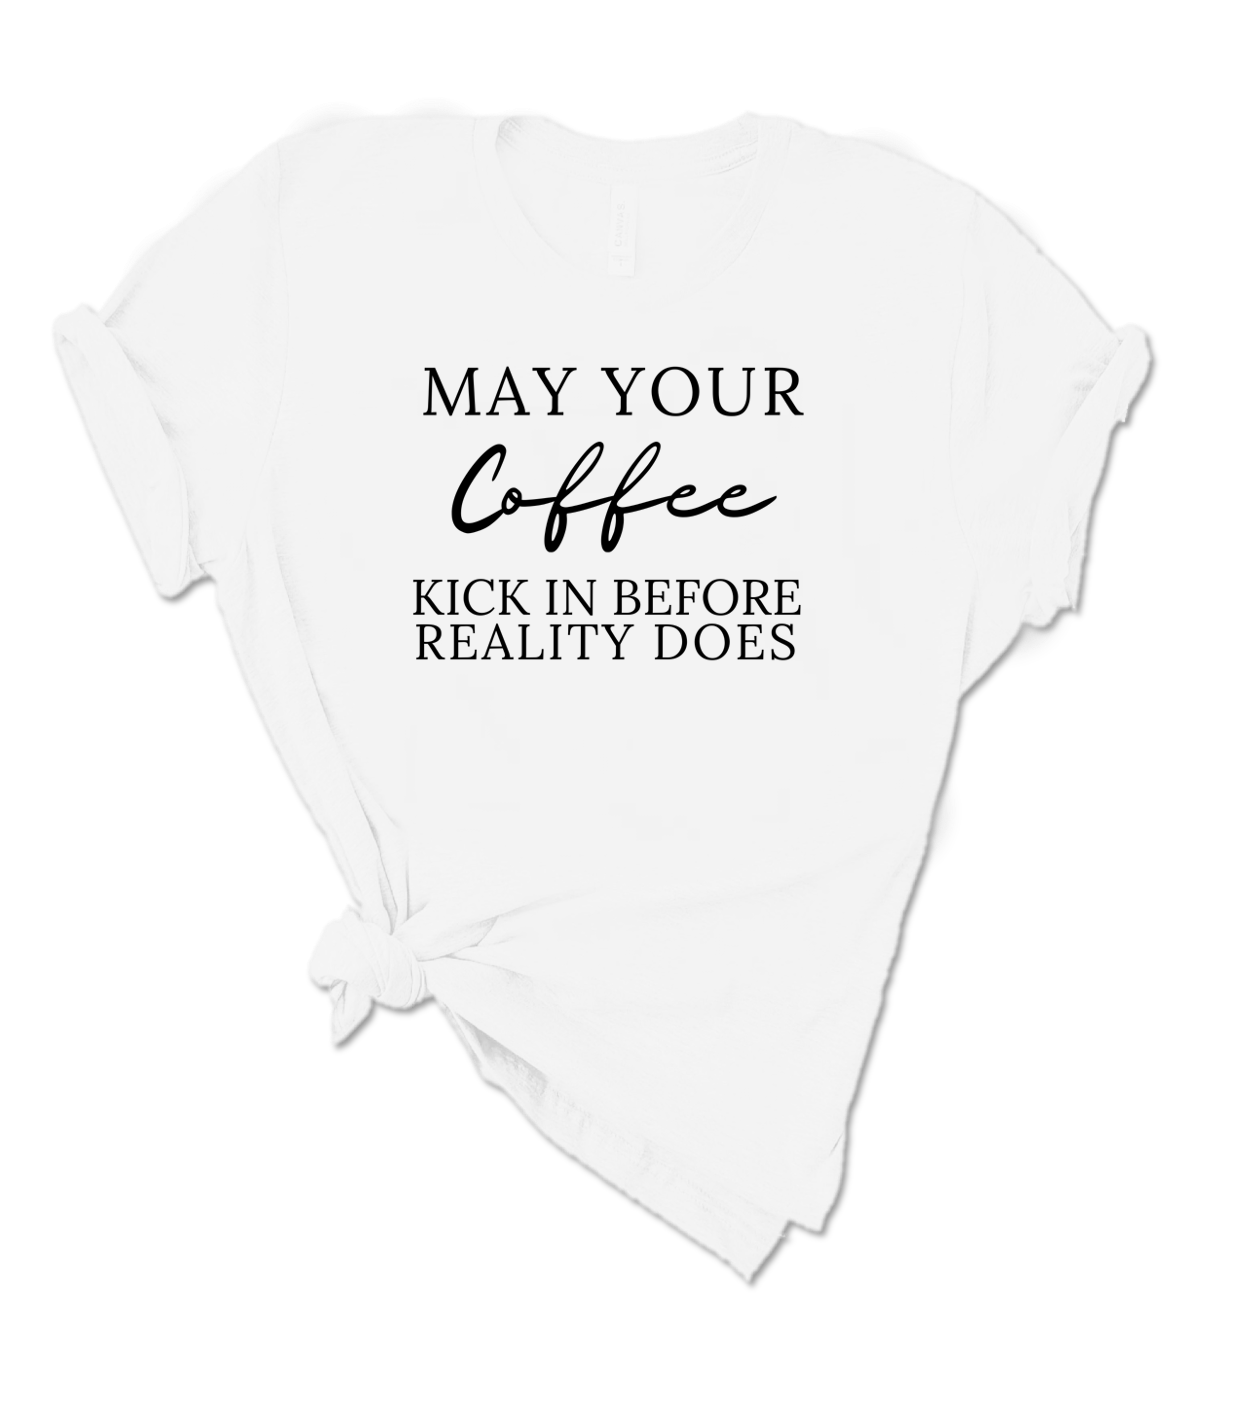 MAY YOUR COFFEE KICK IN BEFORE REALITY DOES